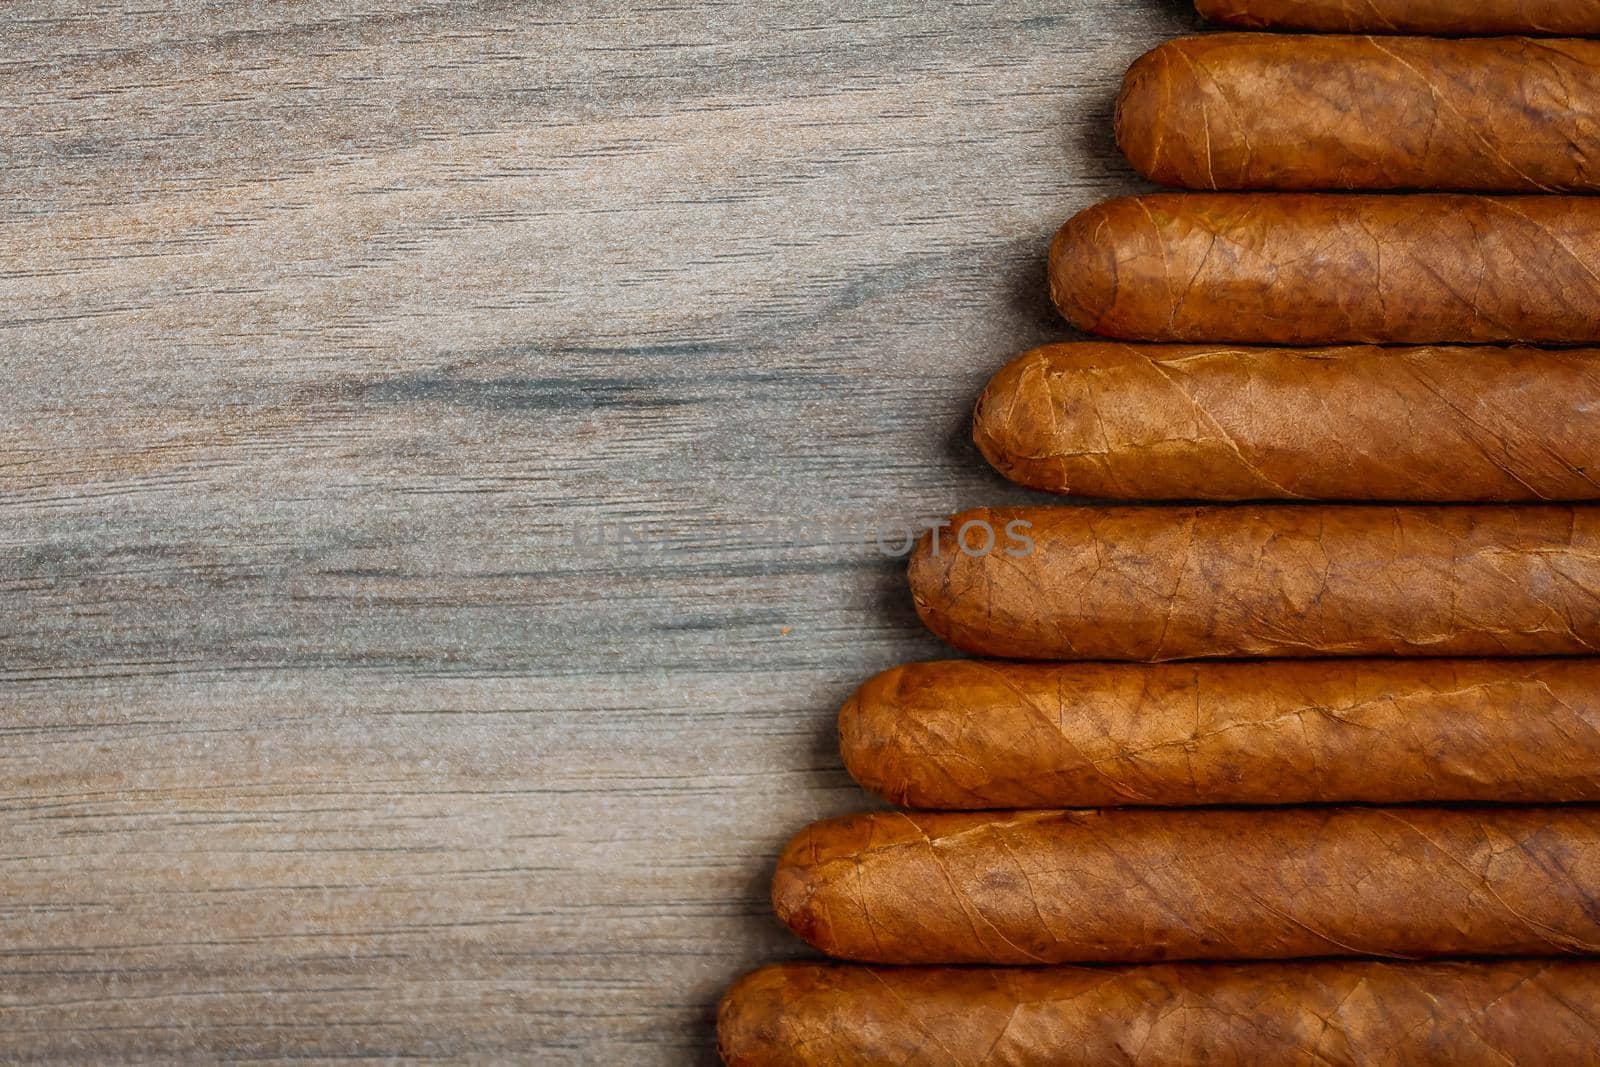 Cigars on the wooden background